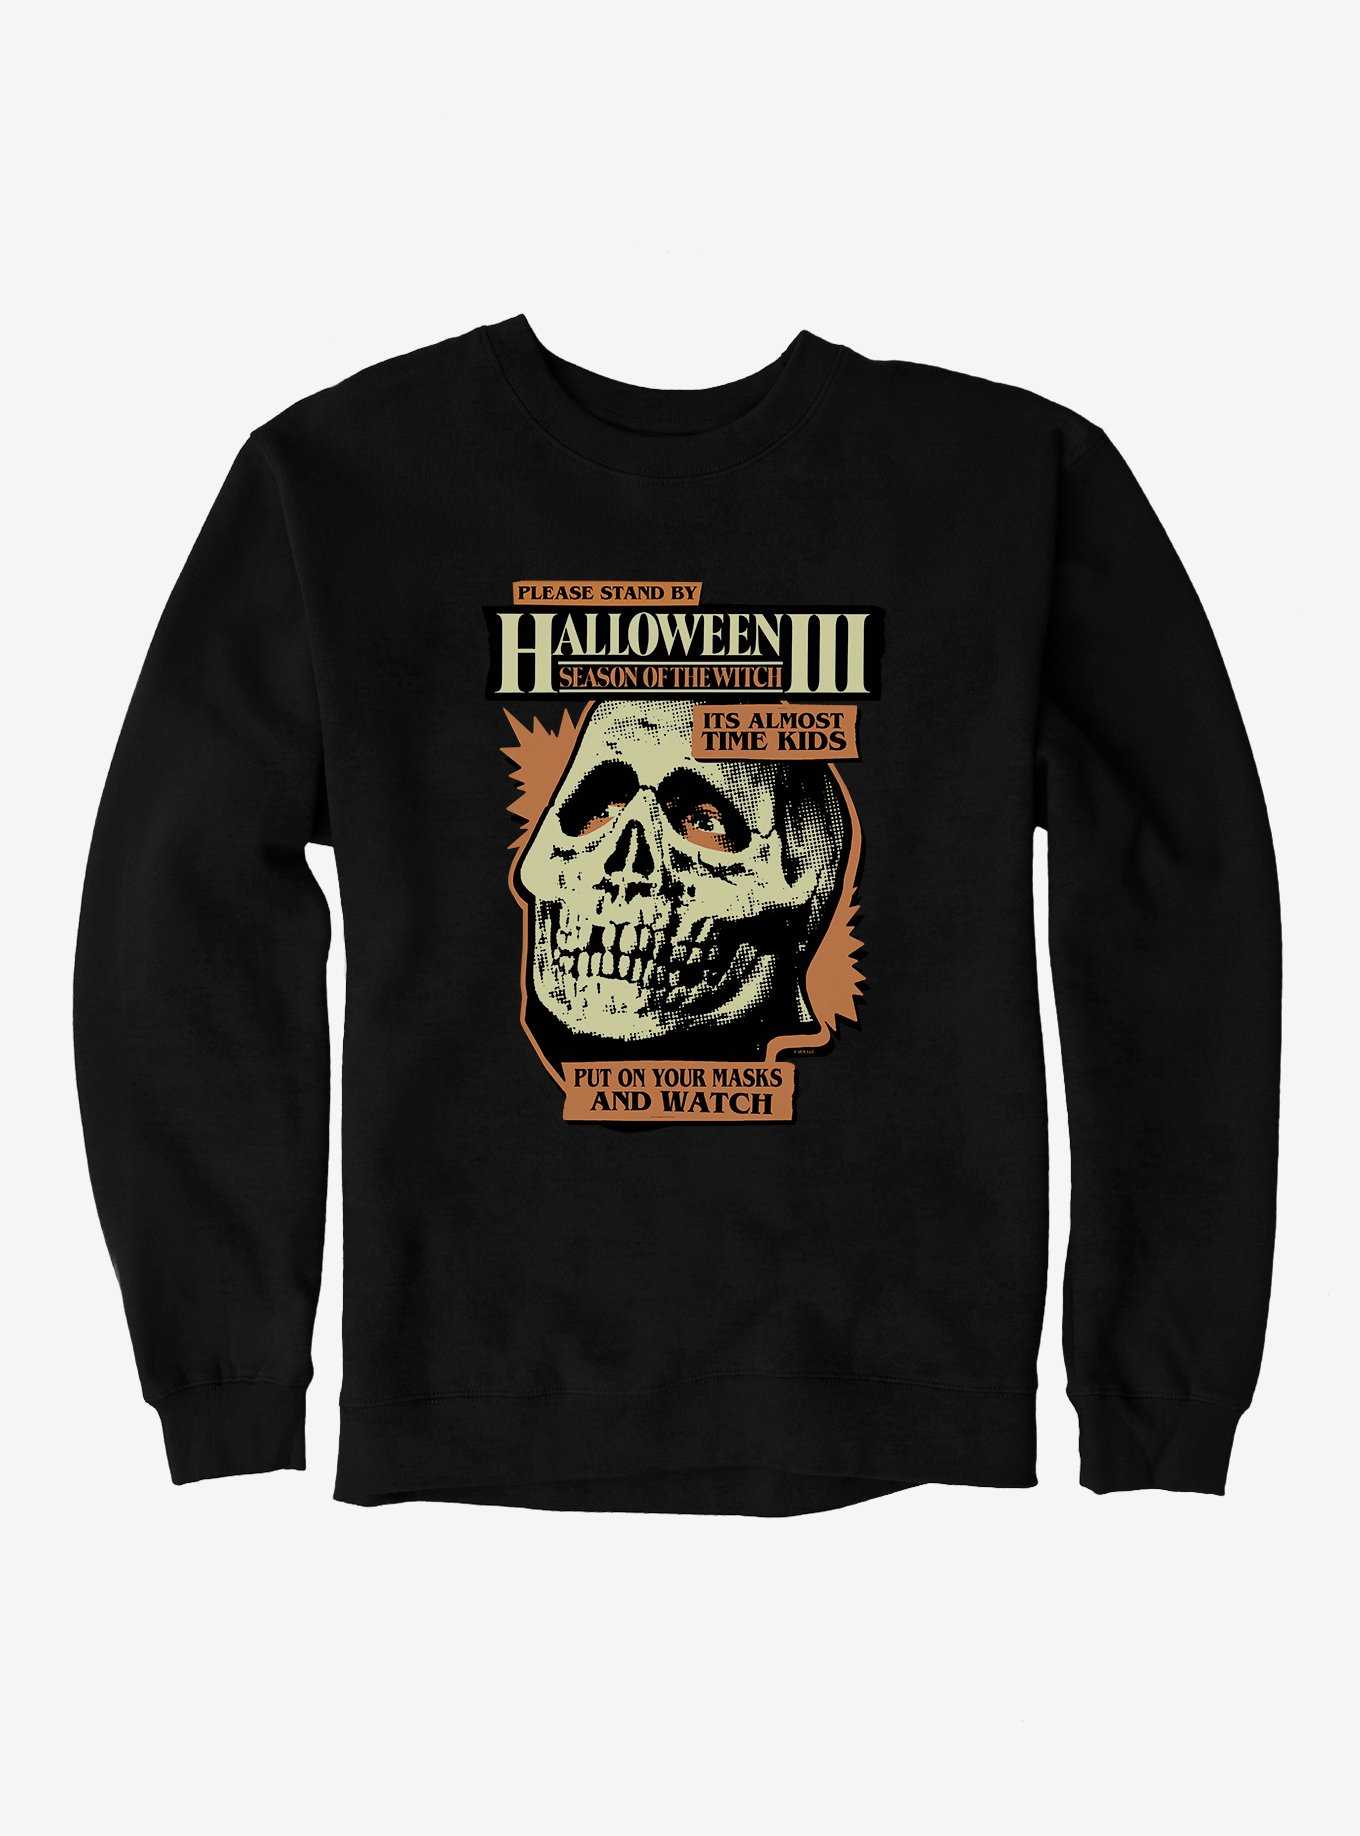 Halloween III: Season Of The Witch Please Stand By Sweatshirt, , hi-res